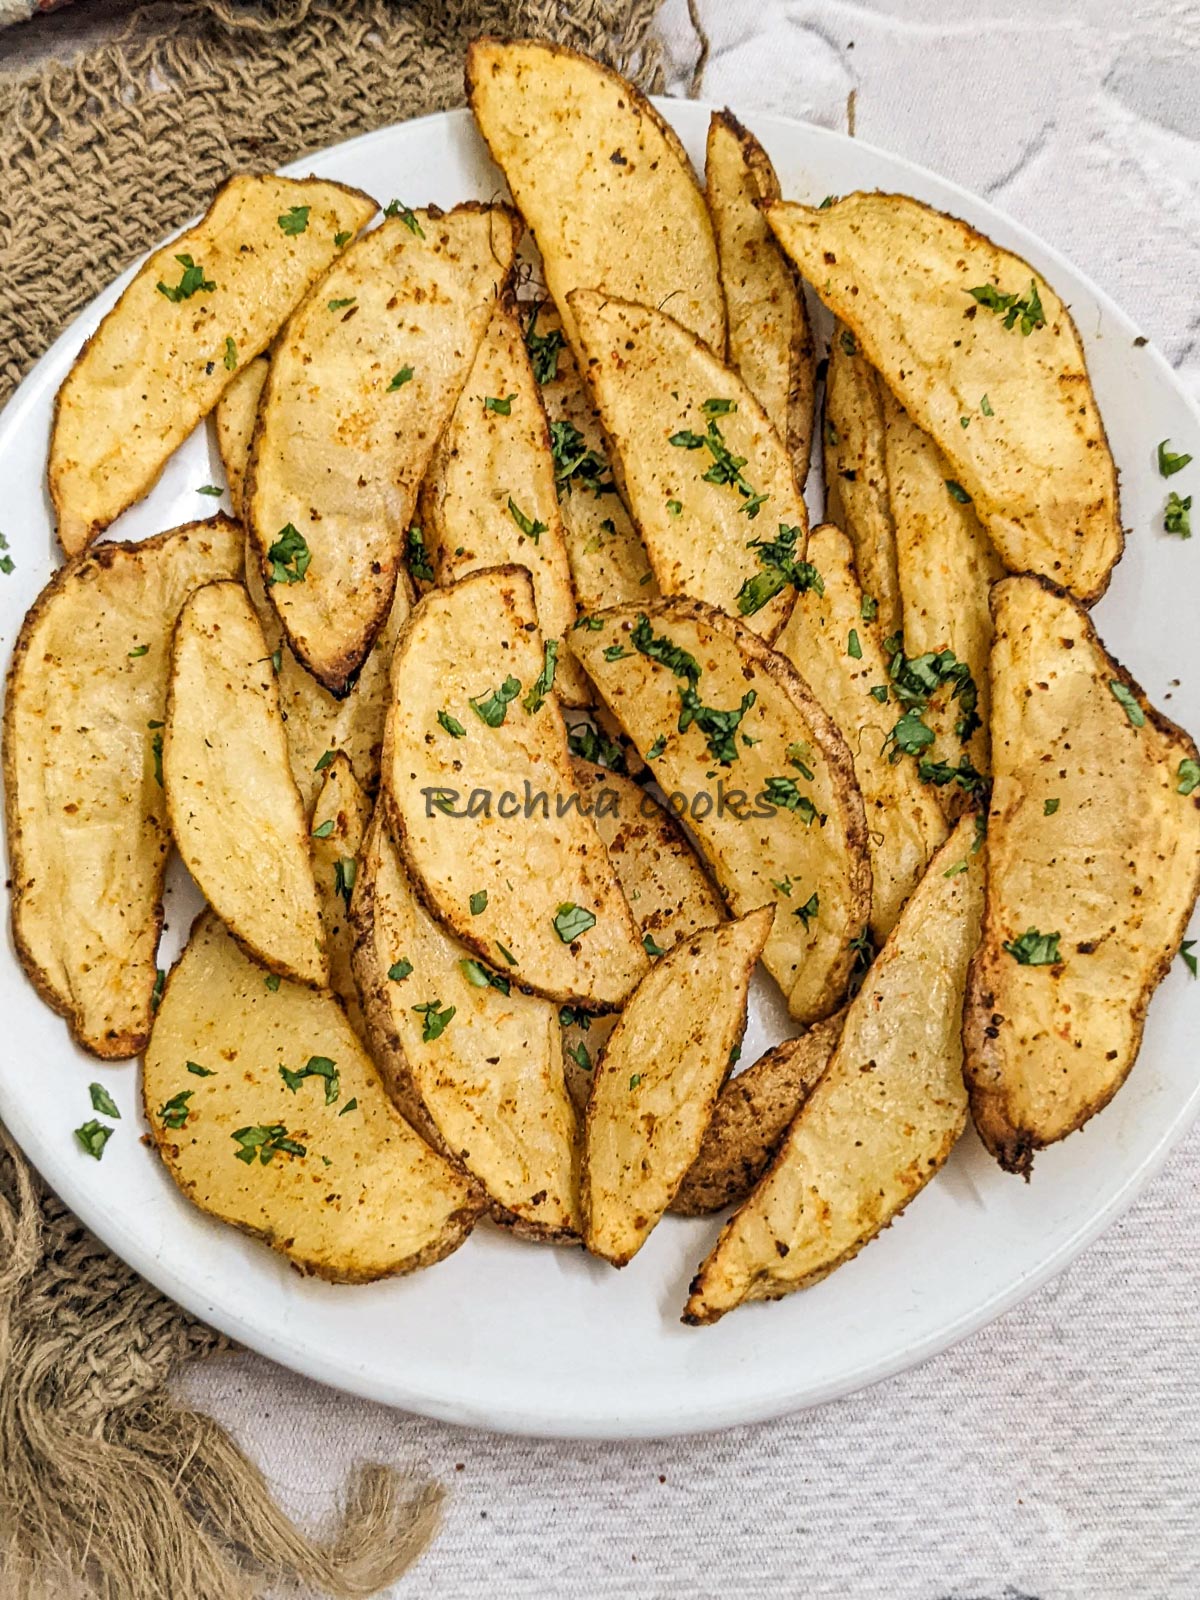 Top close up shot of crispy potato wedges on a white plate.